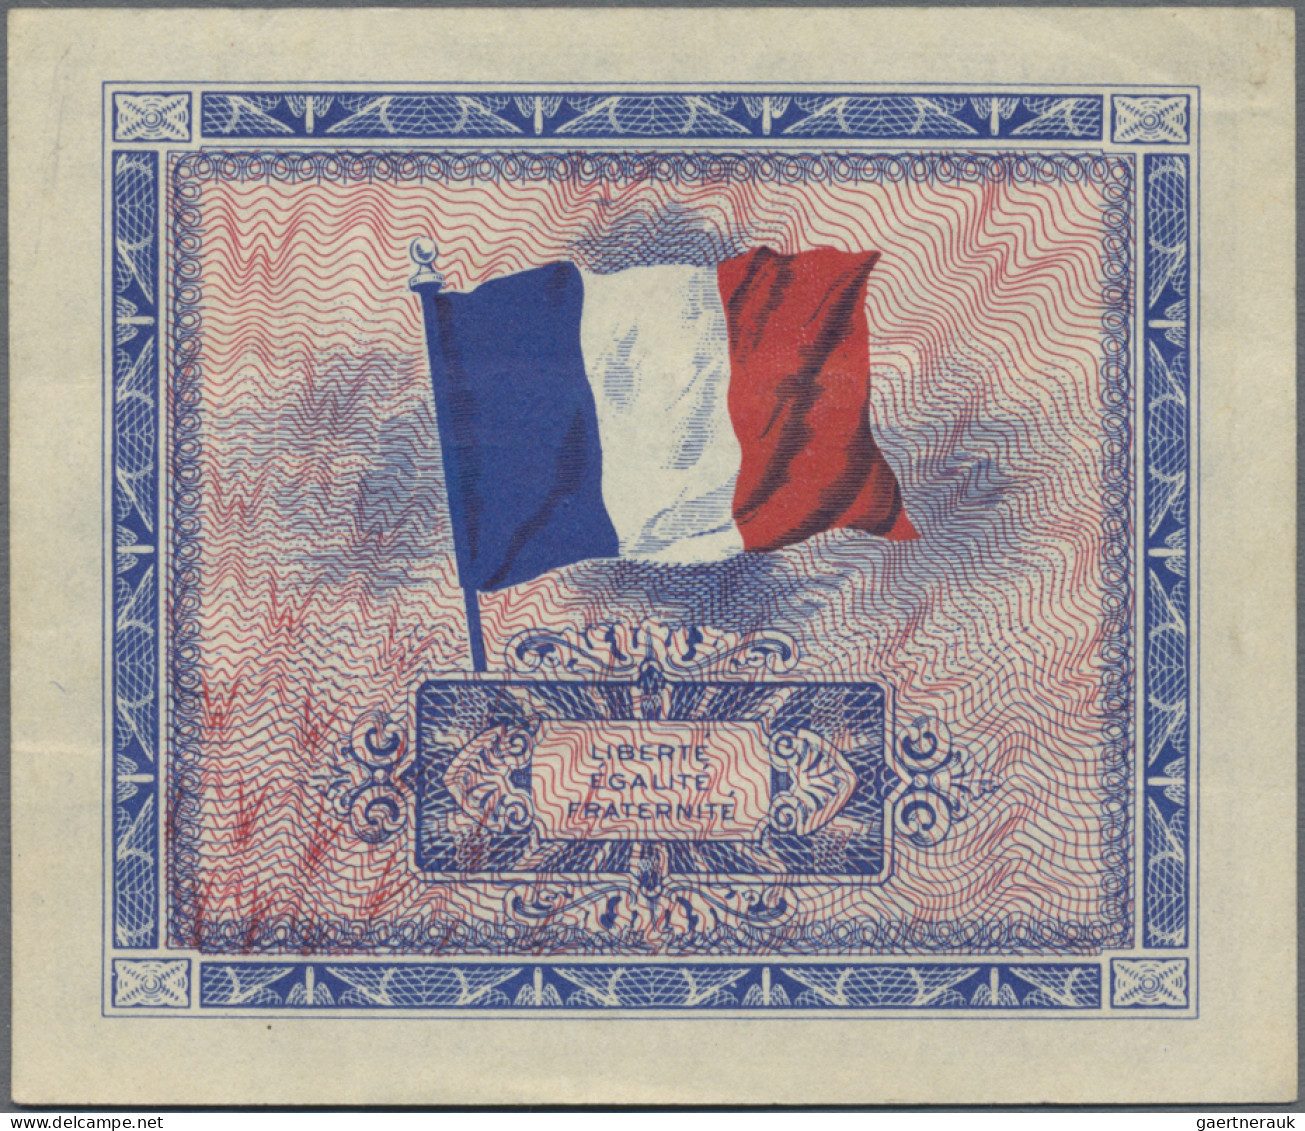 France: Allied Military Currency, series 1944, lot with 7 banknotes, with 2, 5,